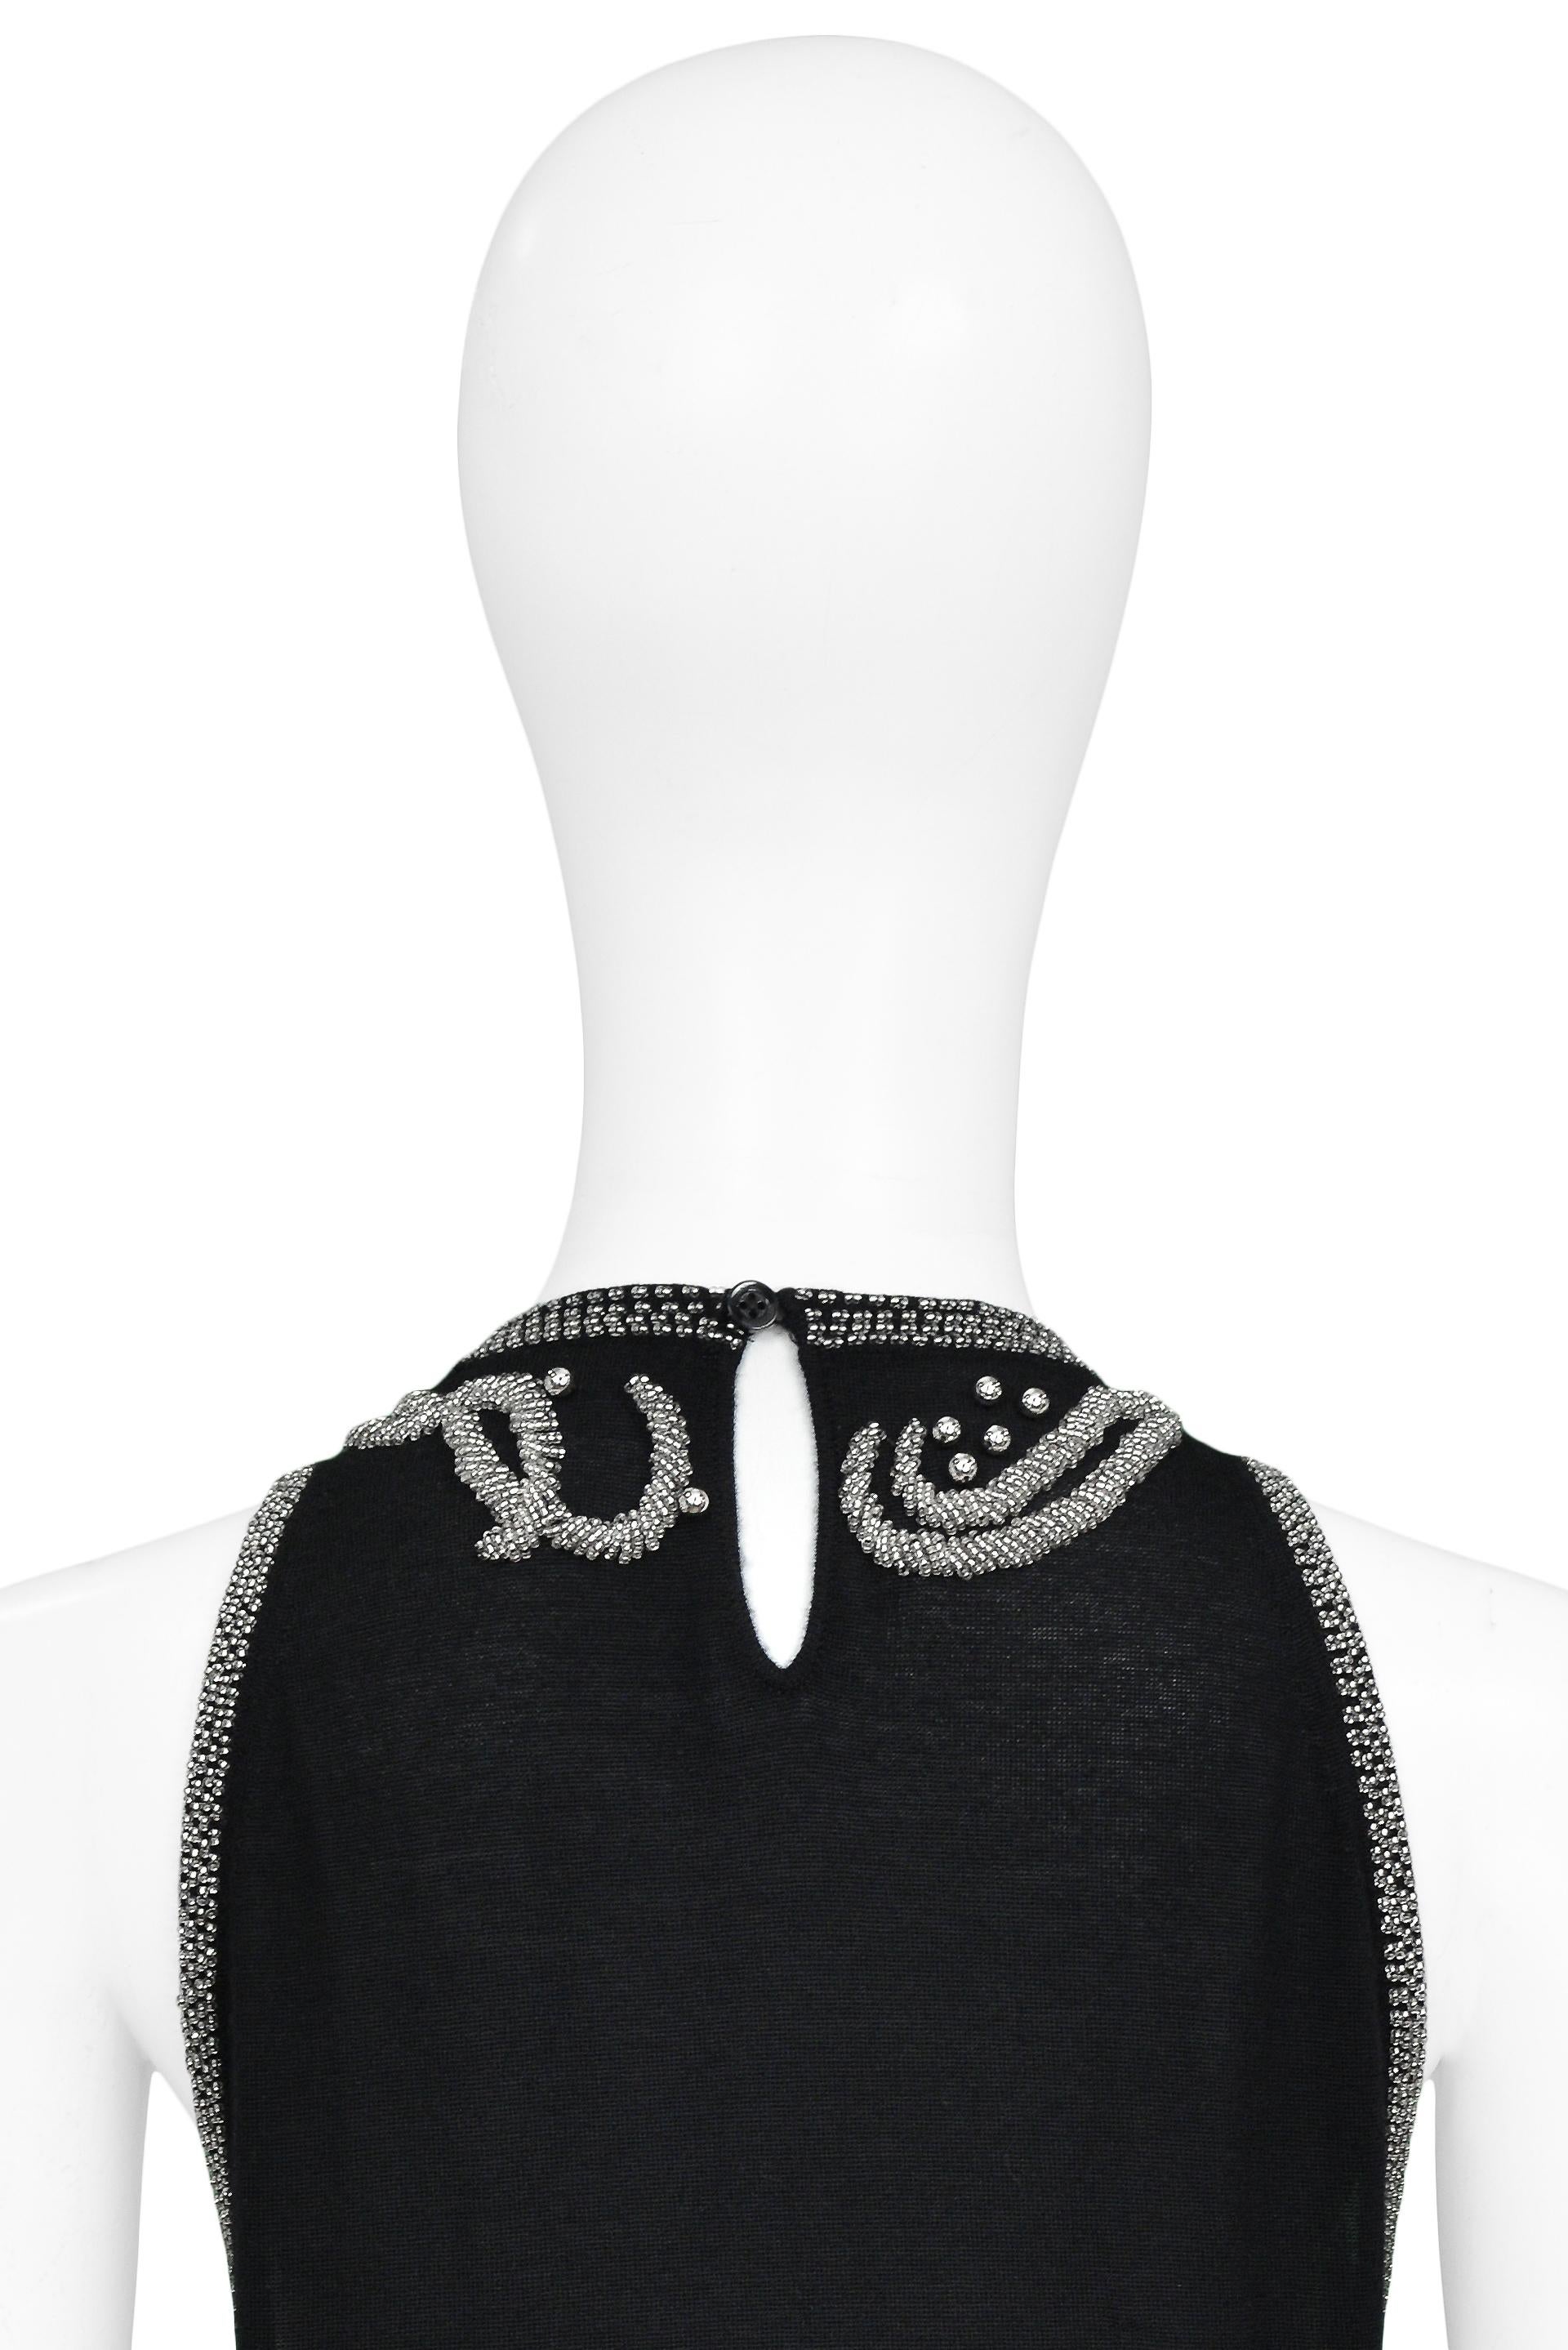 Balenciaga Black Knit Top With Silver Beading For Sale 1